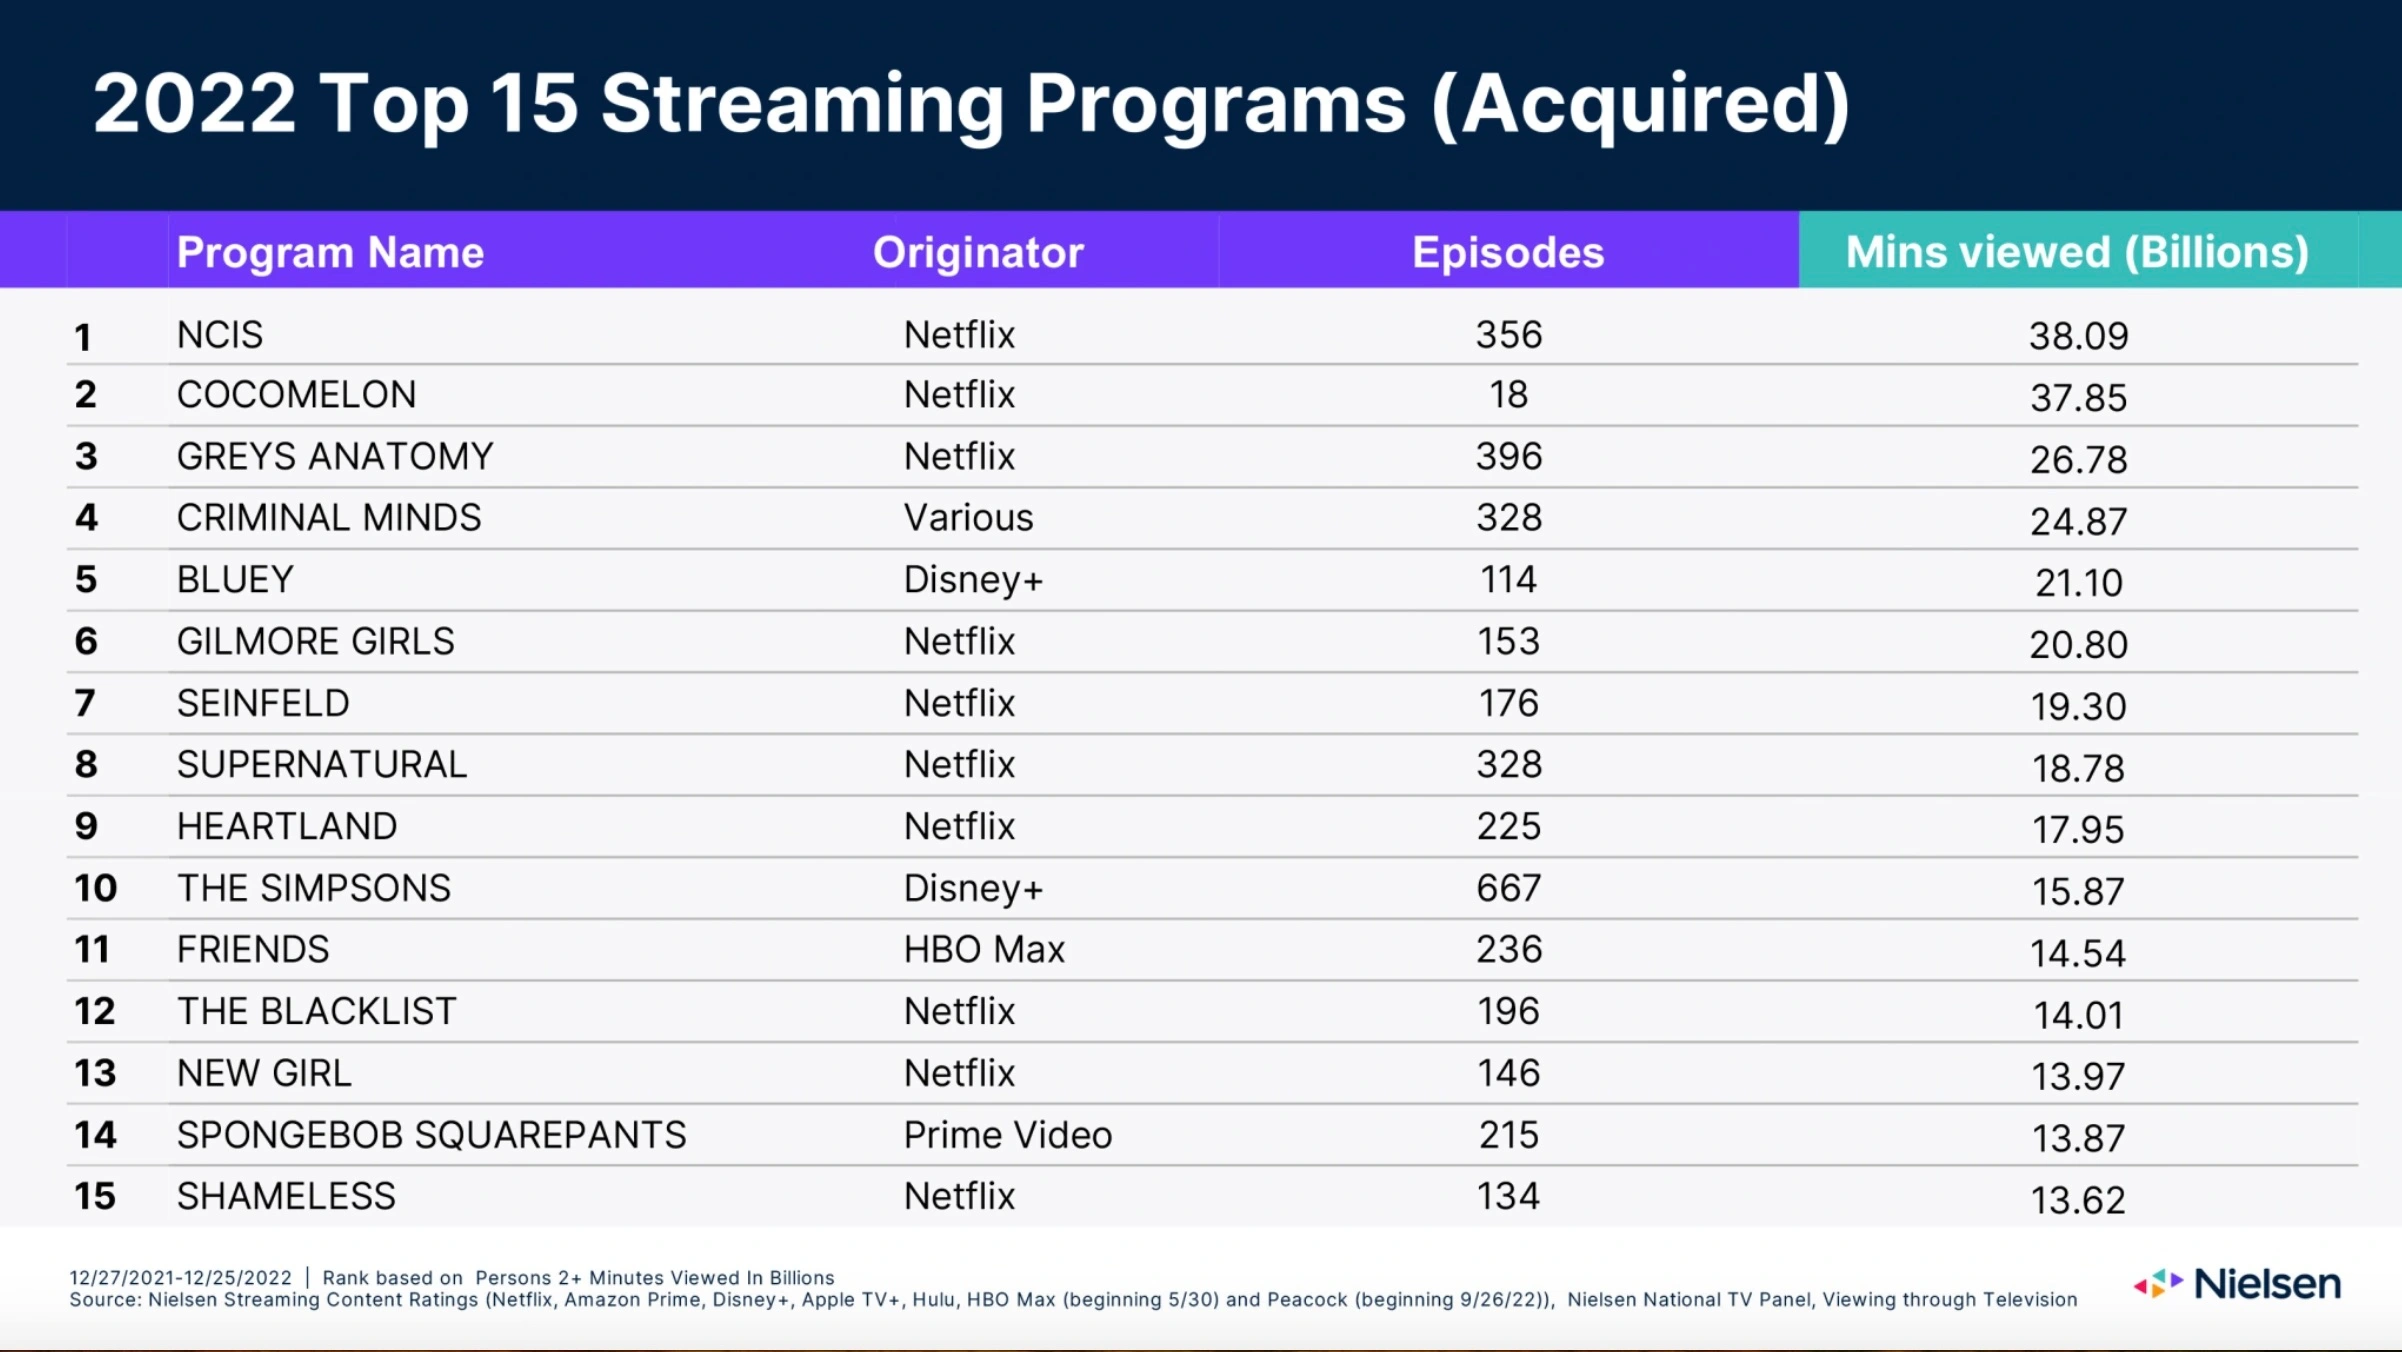 2022 Top 15 Streaming Programs Acquired